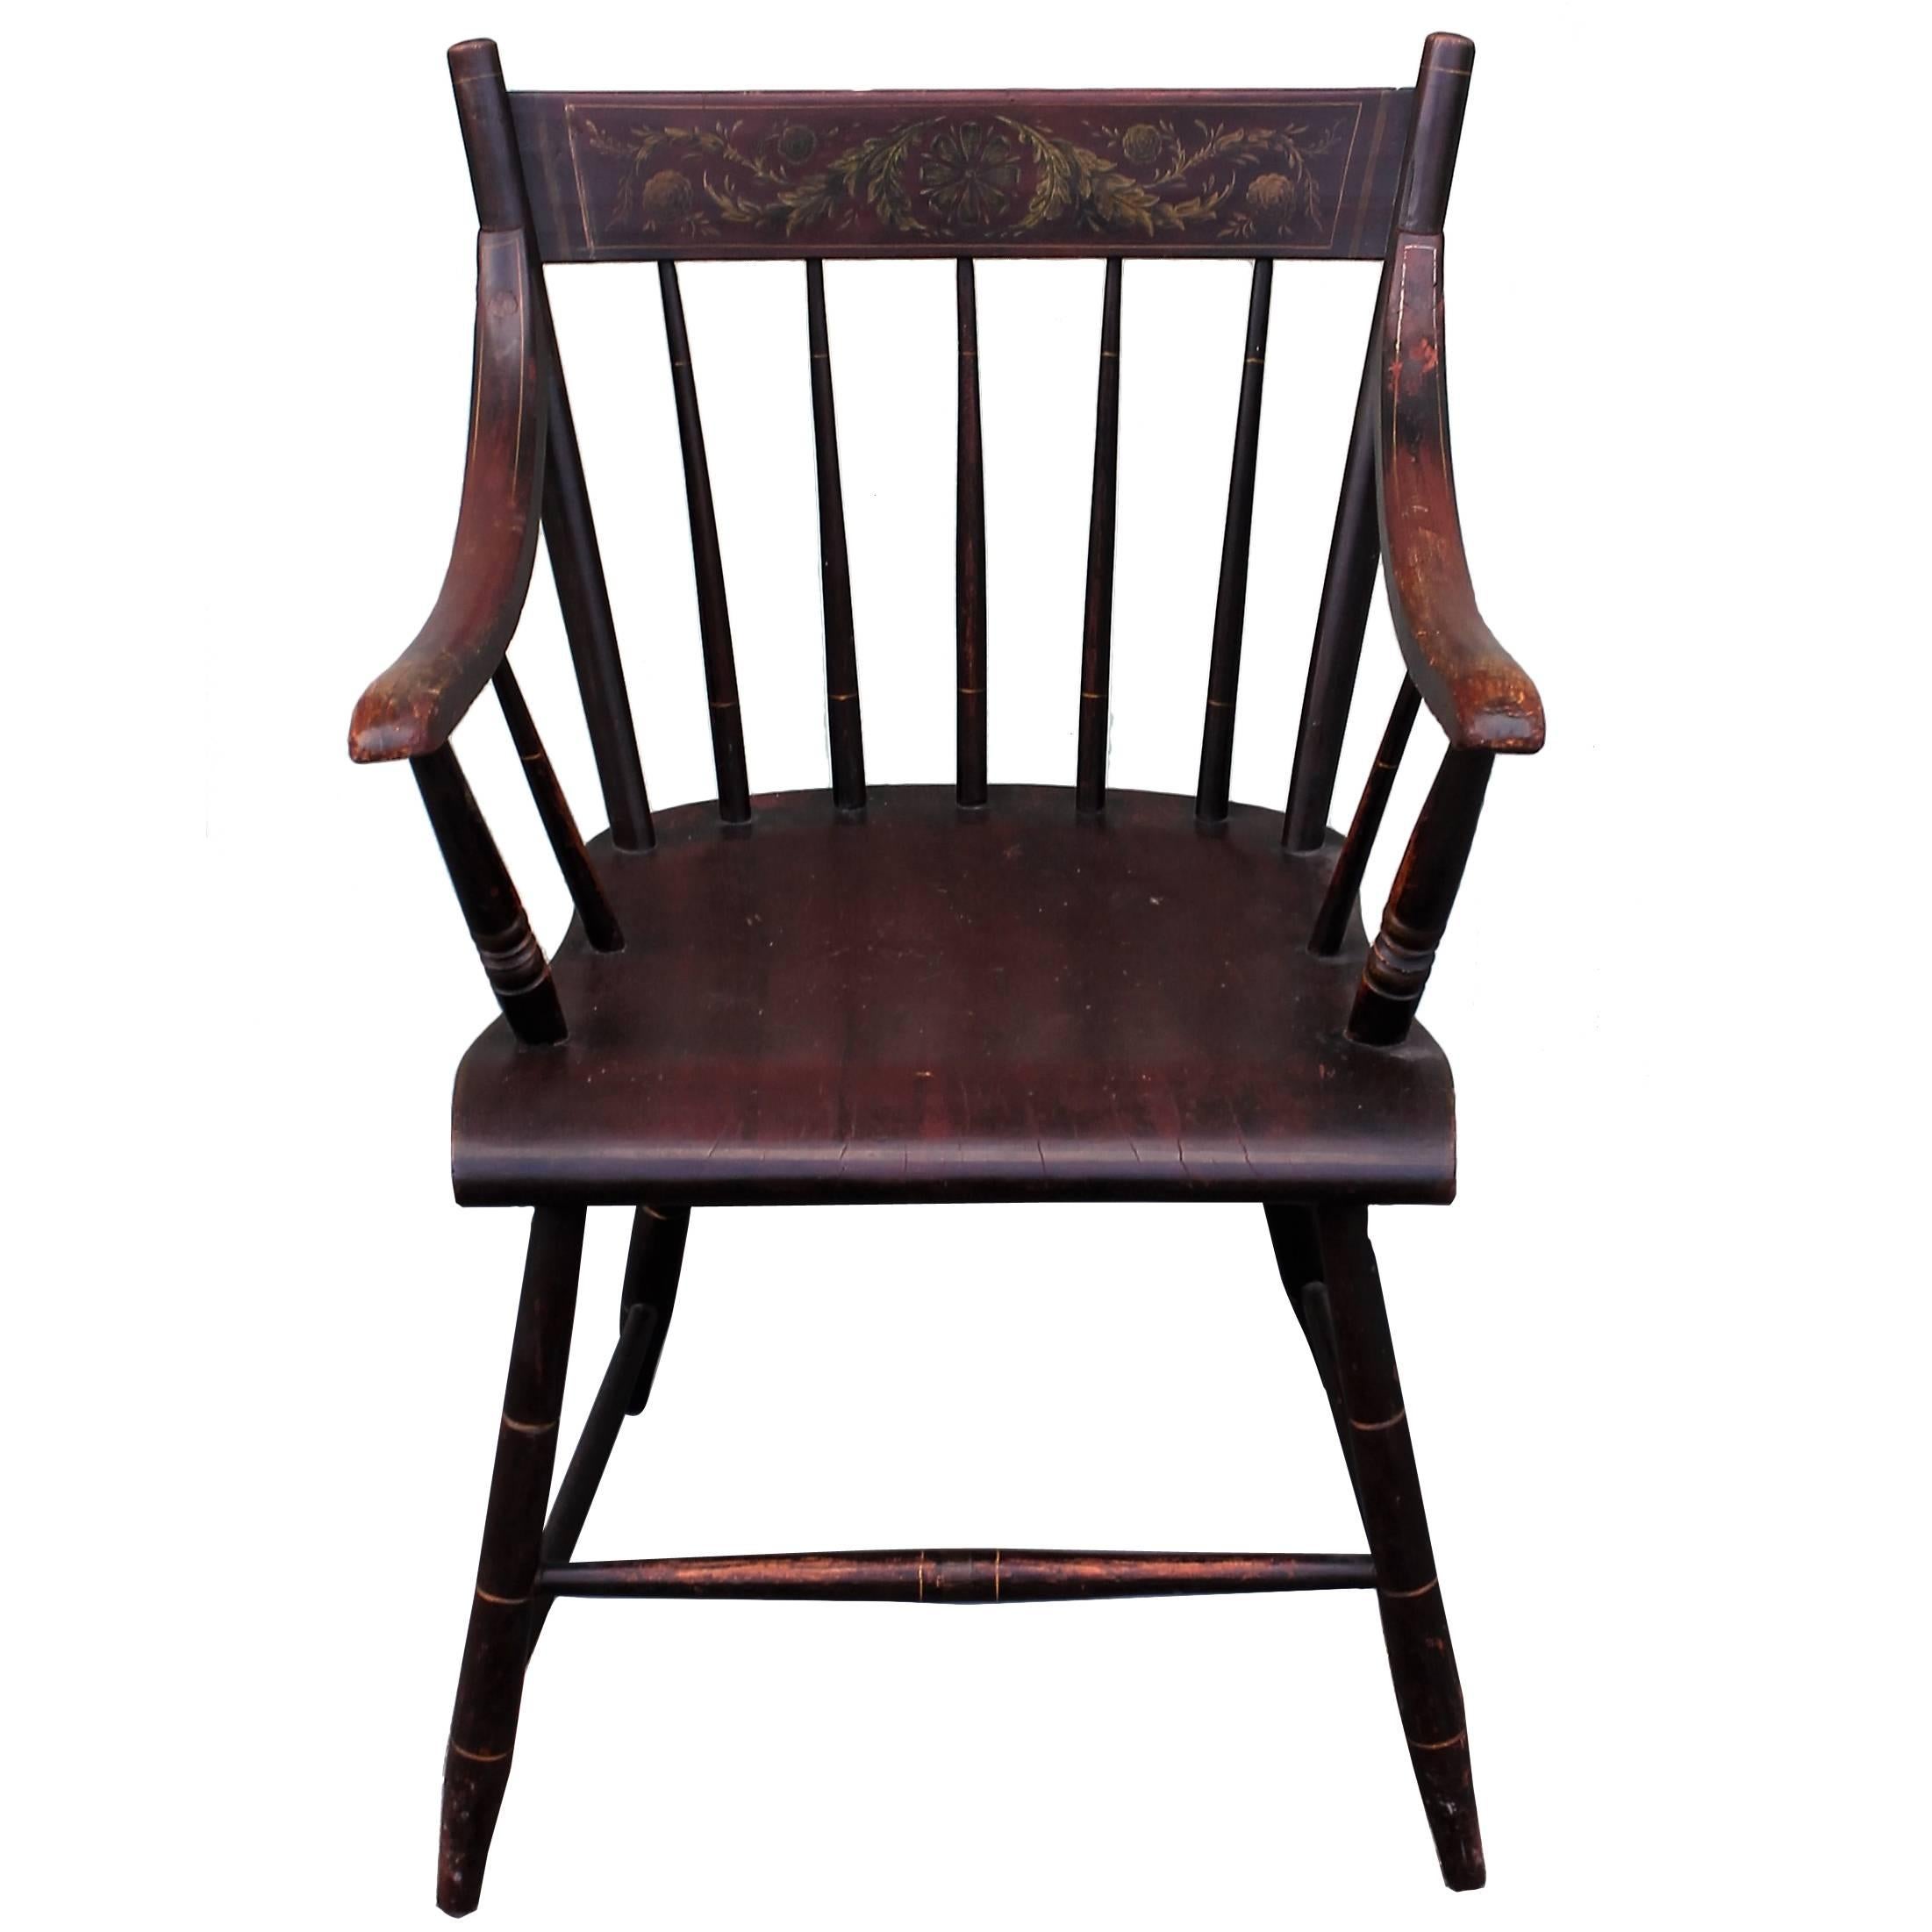 Early Original Paint Decorated 19th Century Hitchcock Armchair For Sale